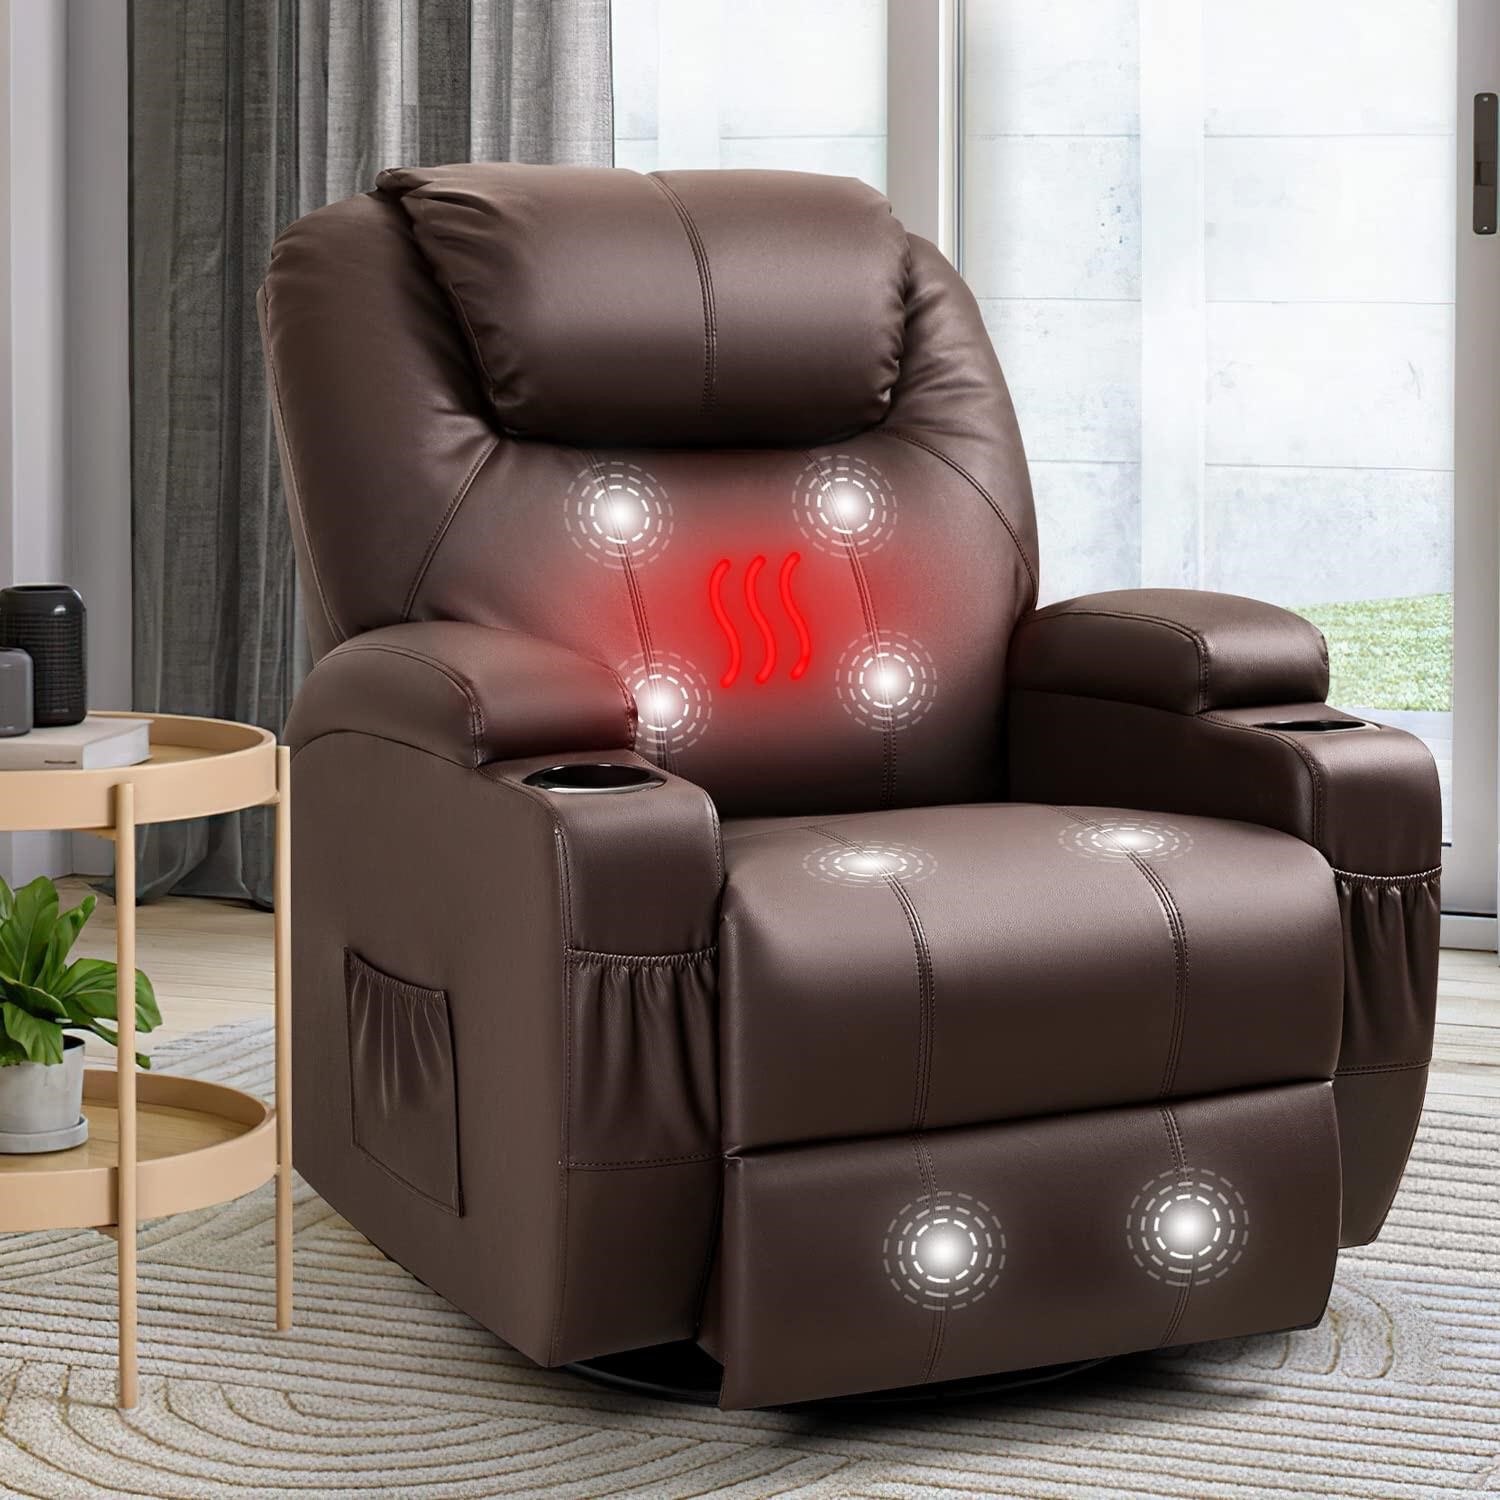 Furniwell Rocker Recliner Chair with Massage and H